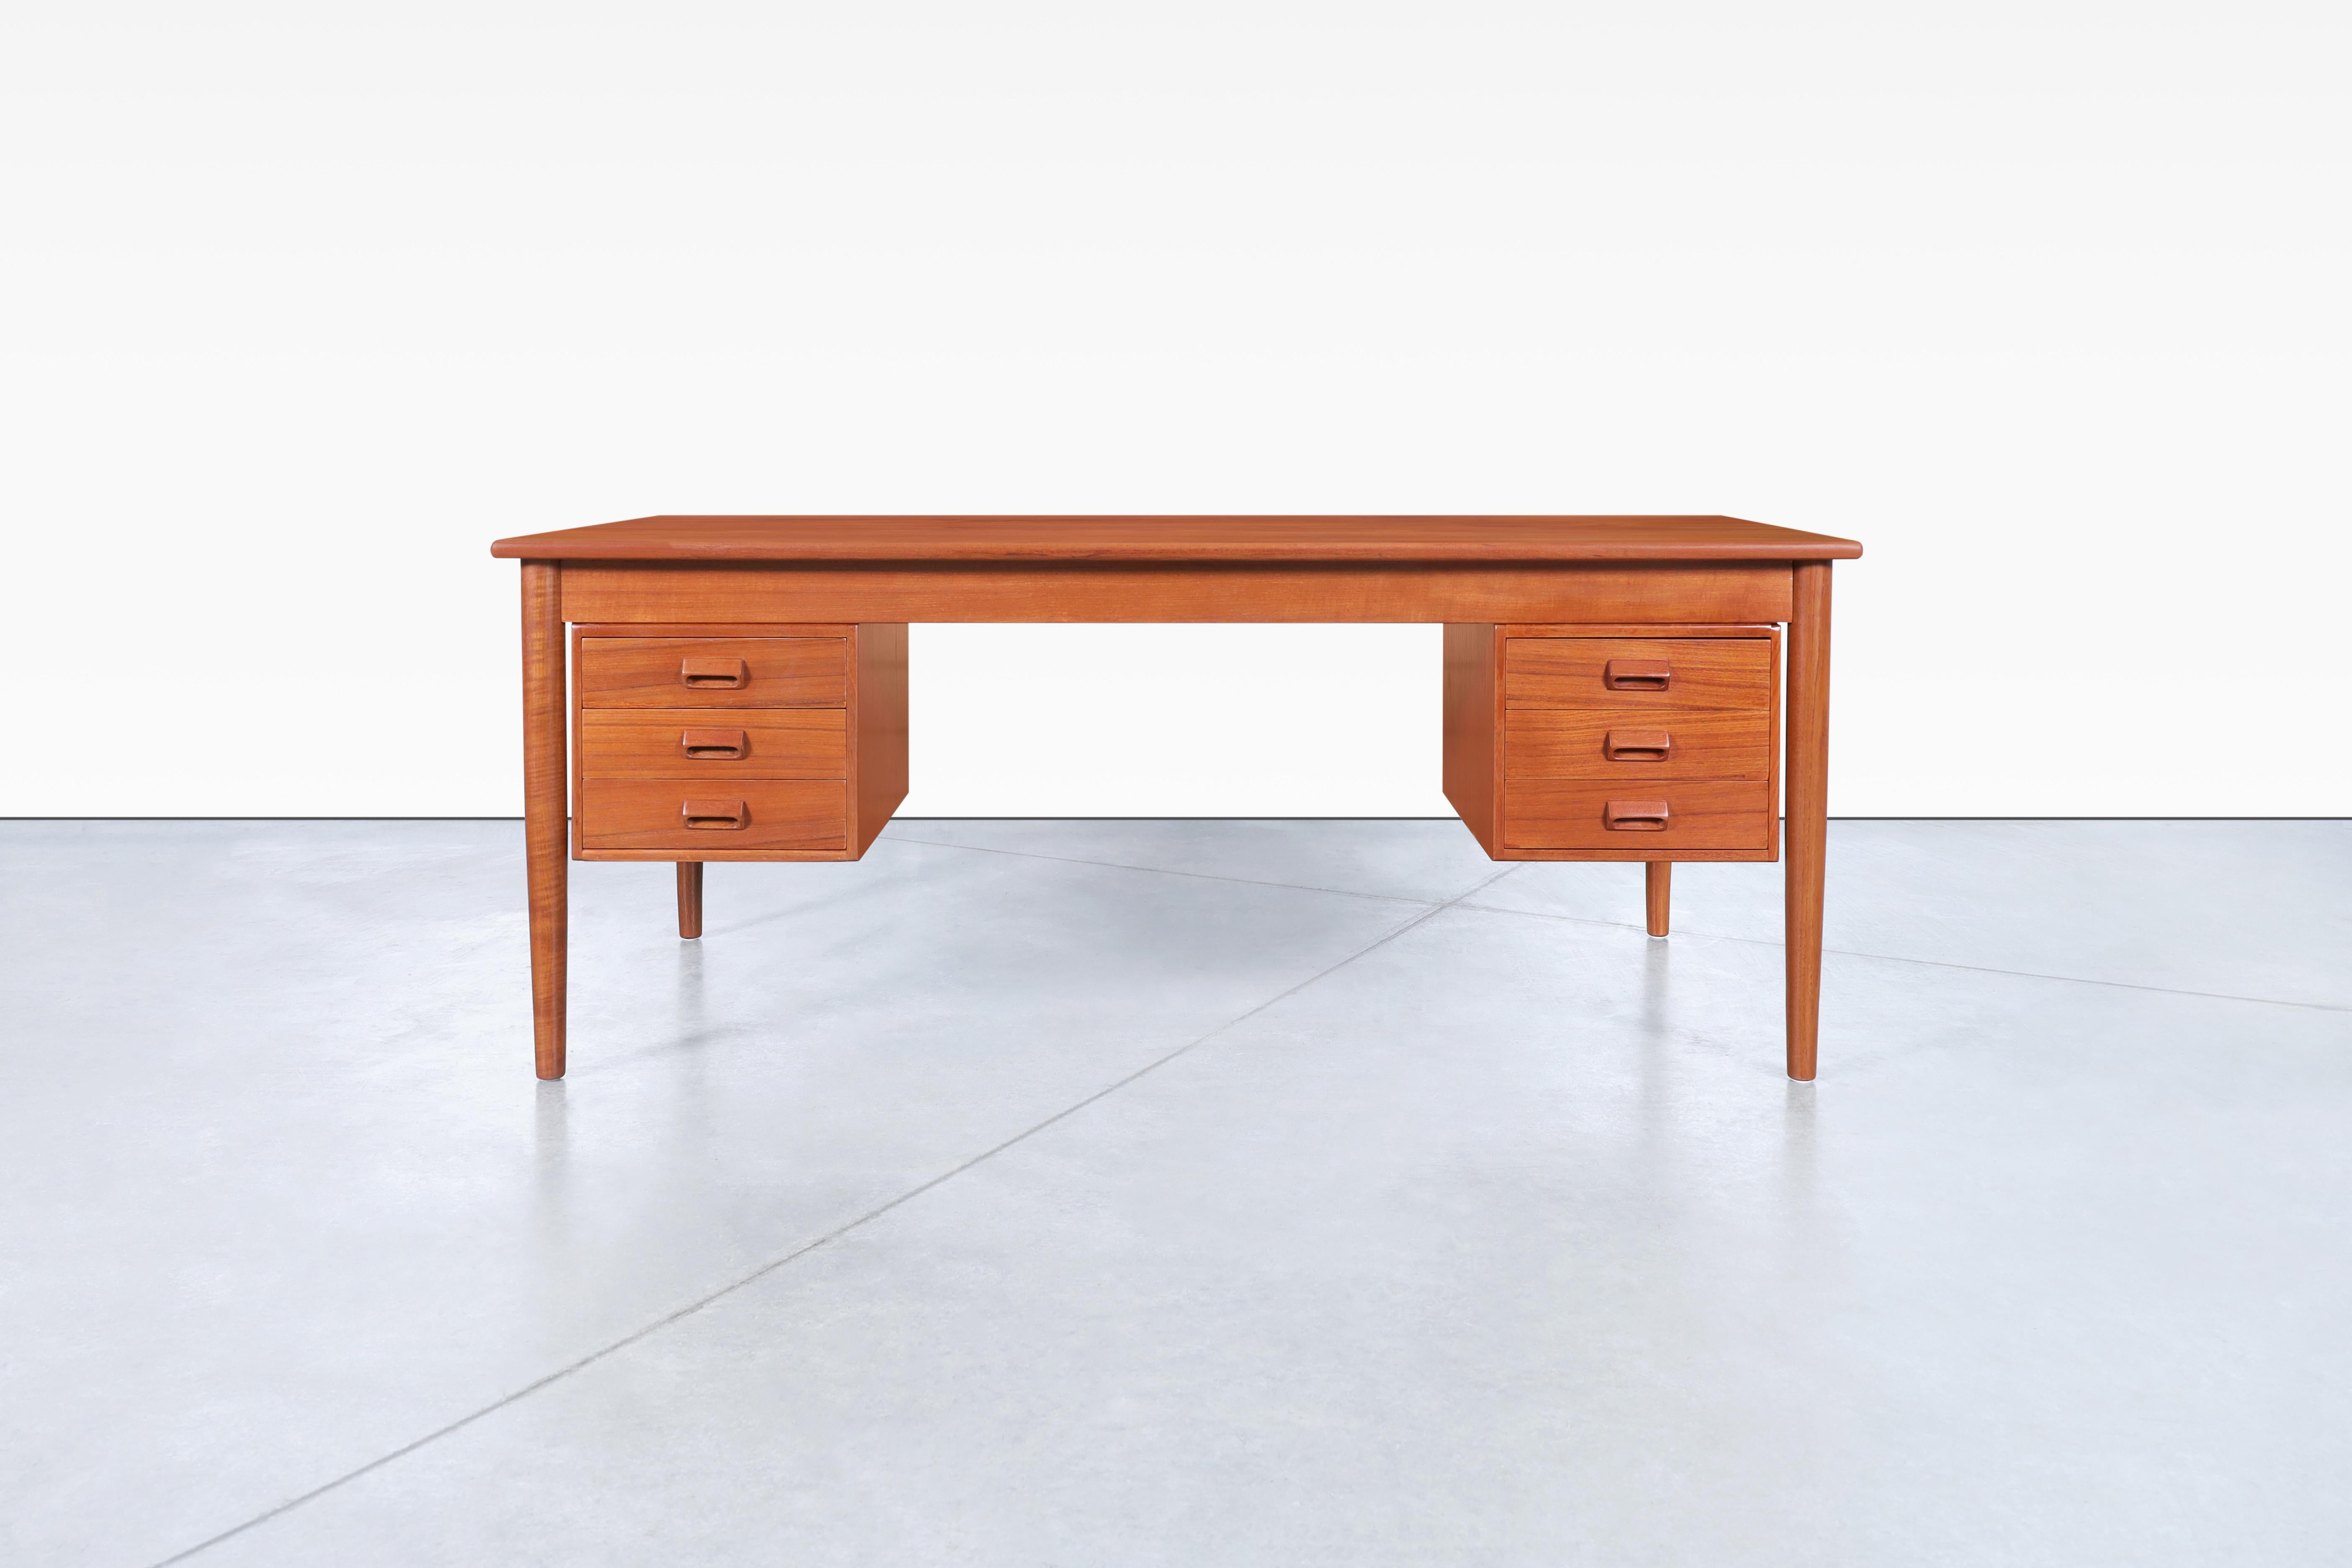 Stunning Danish modern teak desk also known as Model #130 designed by Børge Mogensen for Søborg Møbler in Denmark, circa 1950s. This exquisite desk features a versatile design that caters to your needs while flaunting a symmetrical structure.